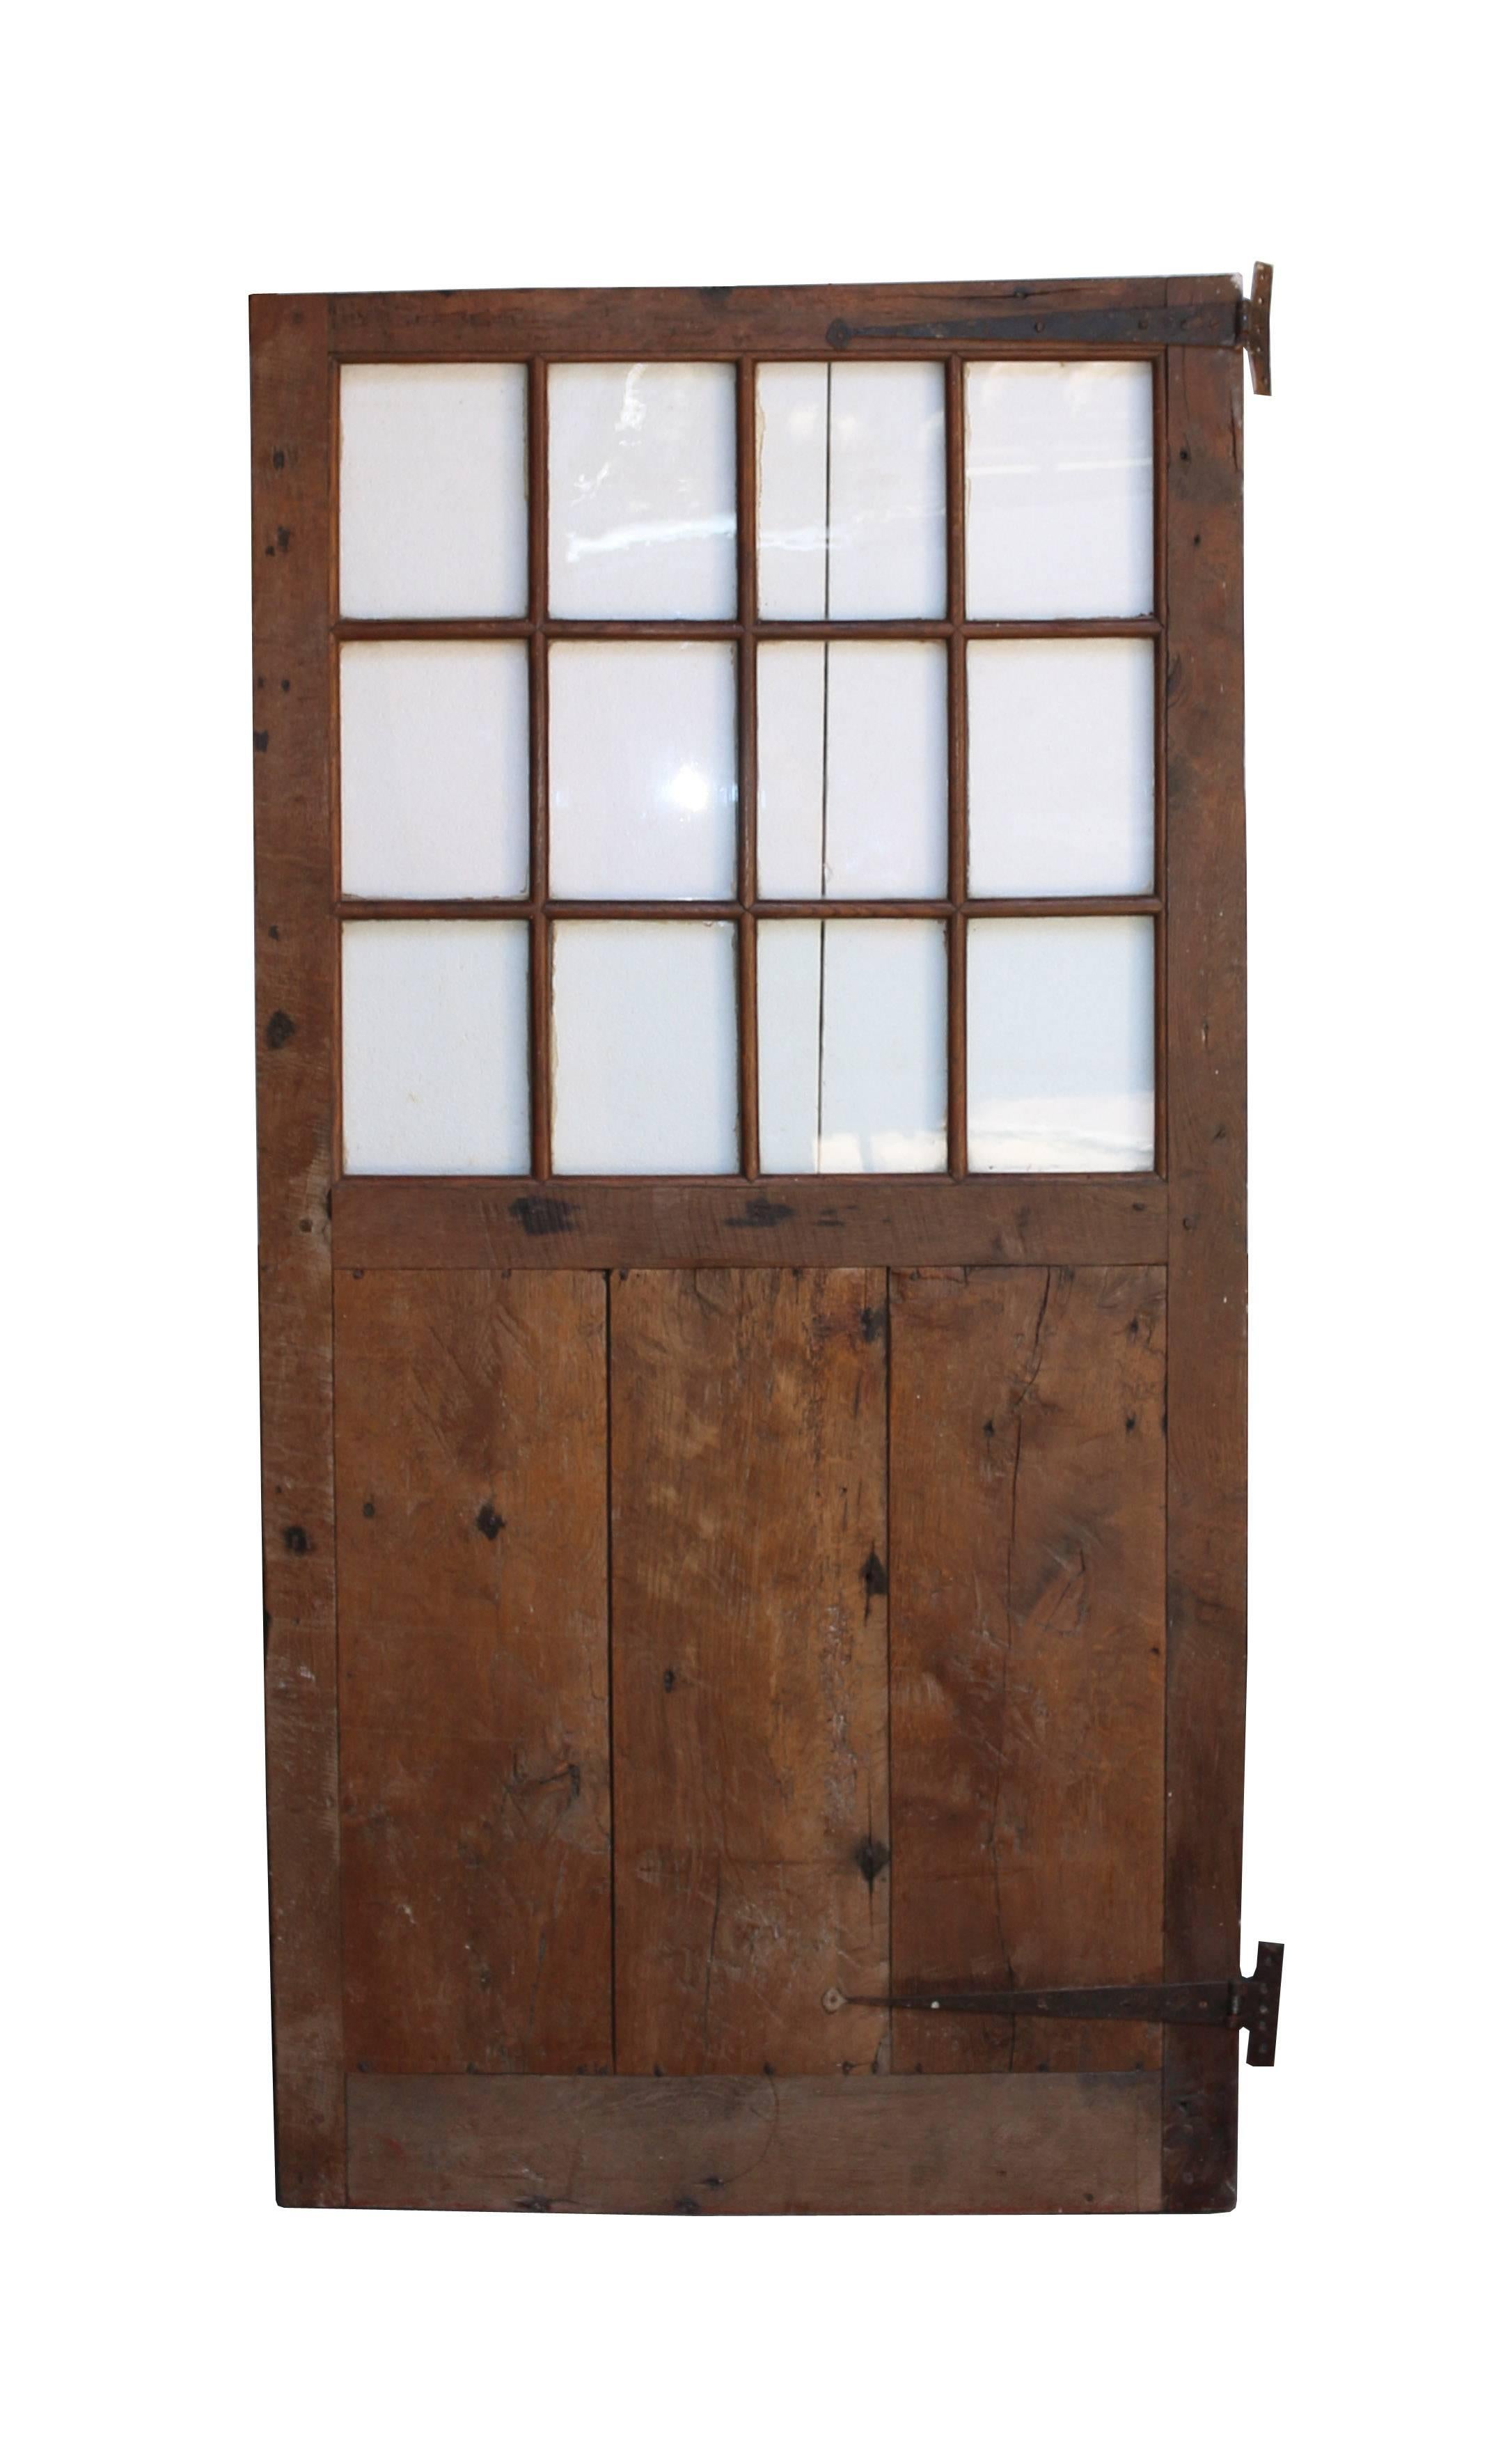 Late 18th century English glazed oak door. Not for external use.
(Please note that the glass is not insured in transit outside of the UK).